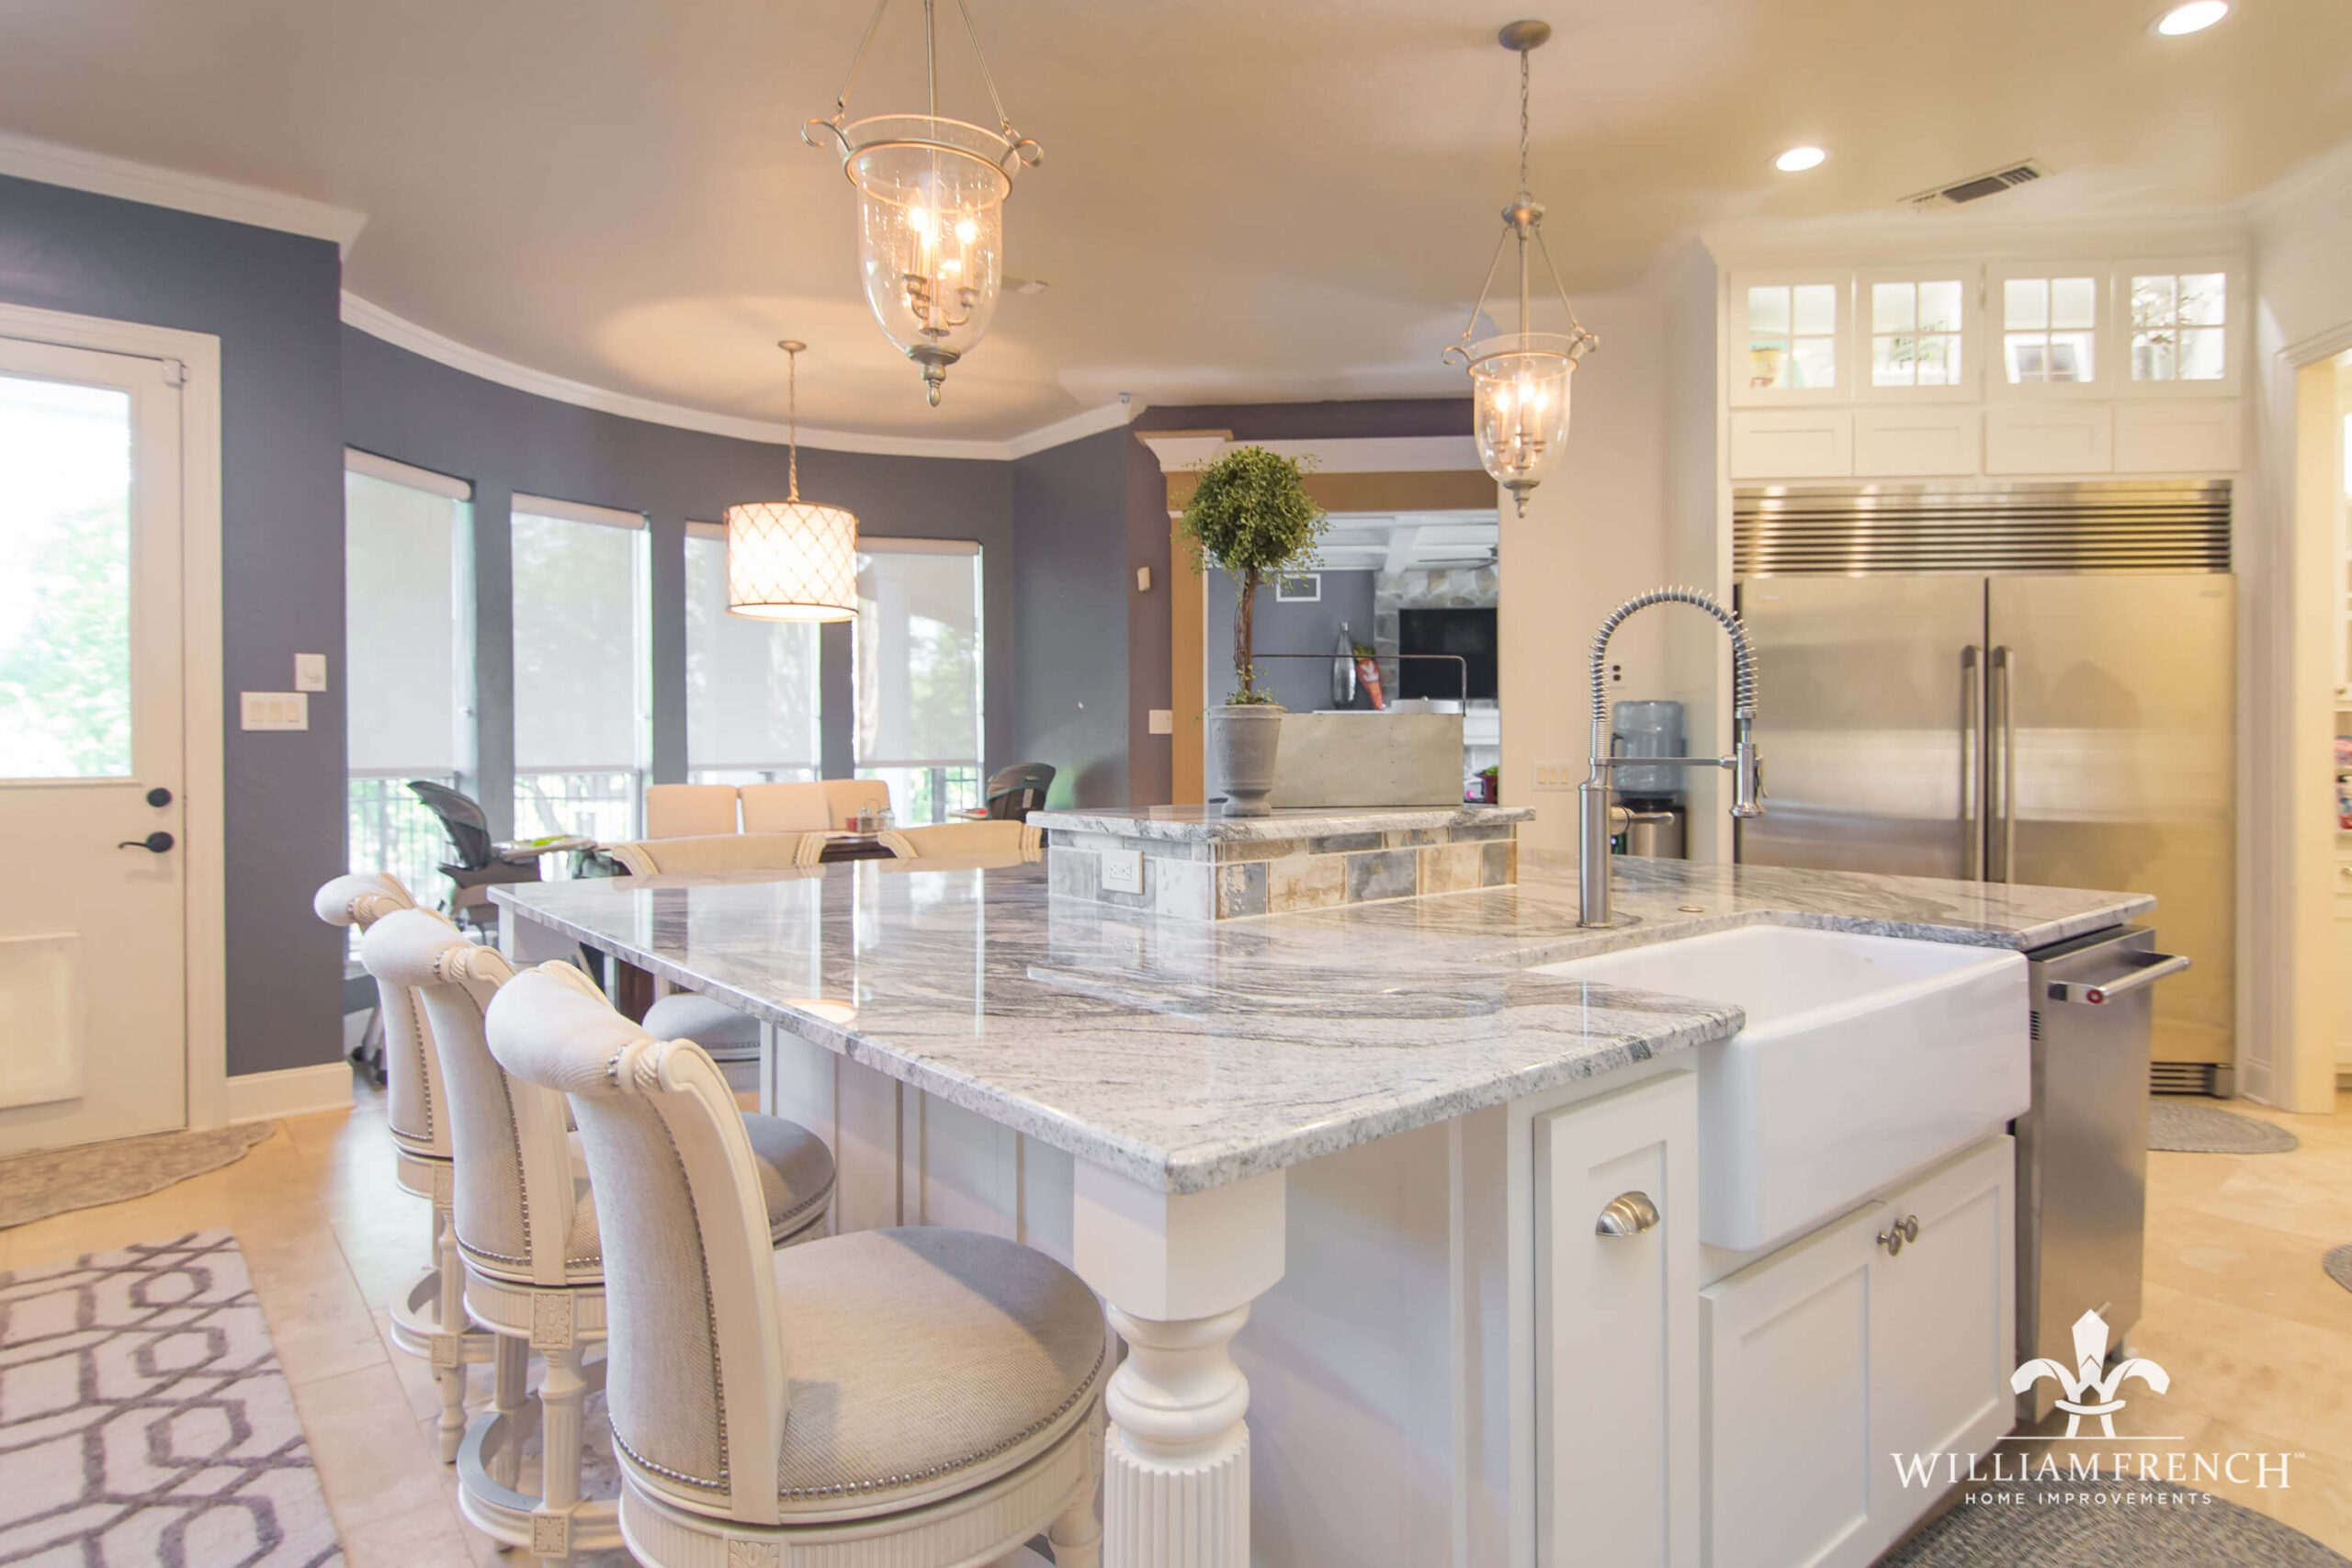 A modern kitchen features a large island with a marble countertop and cushioned stools. Stainless steel appliances, including a refrigerator and oven, are visible. Elegant pendant lights hang above the island, and large windows offer ample natural light.